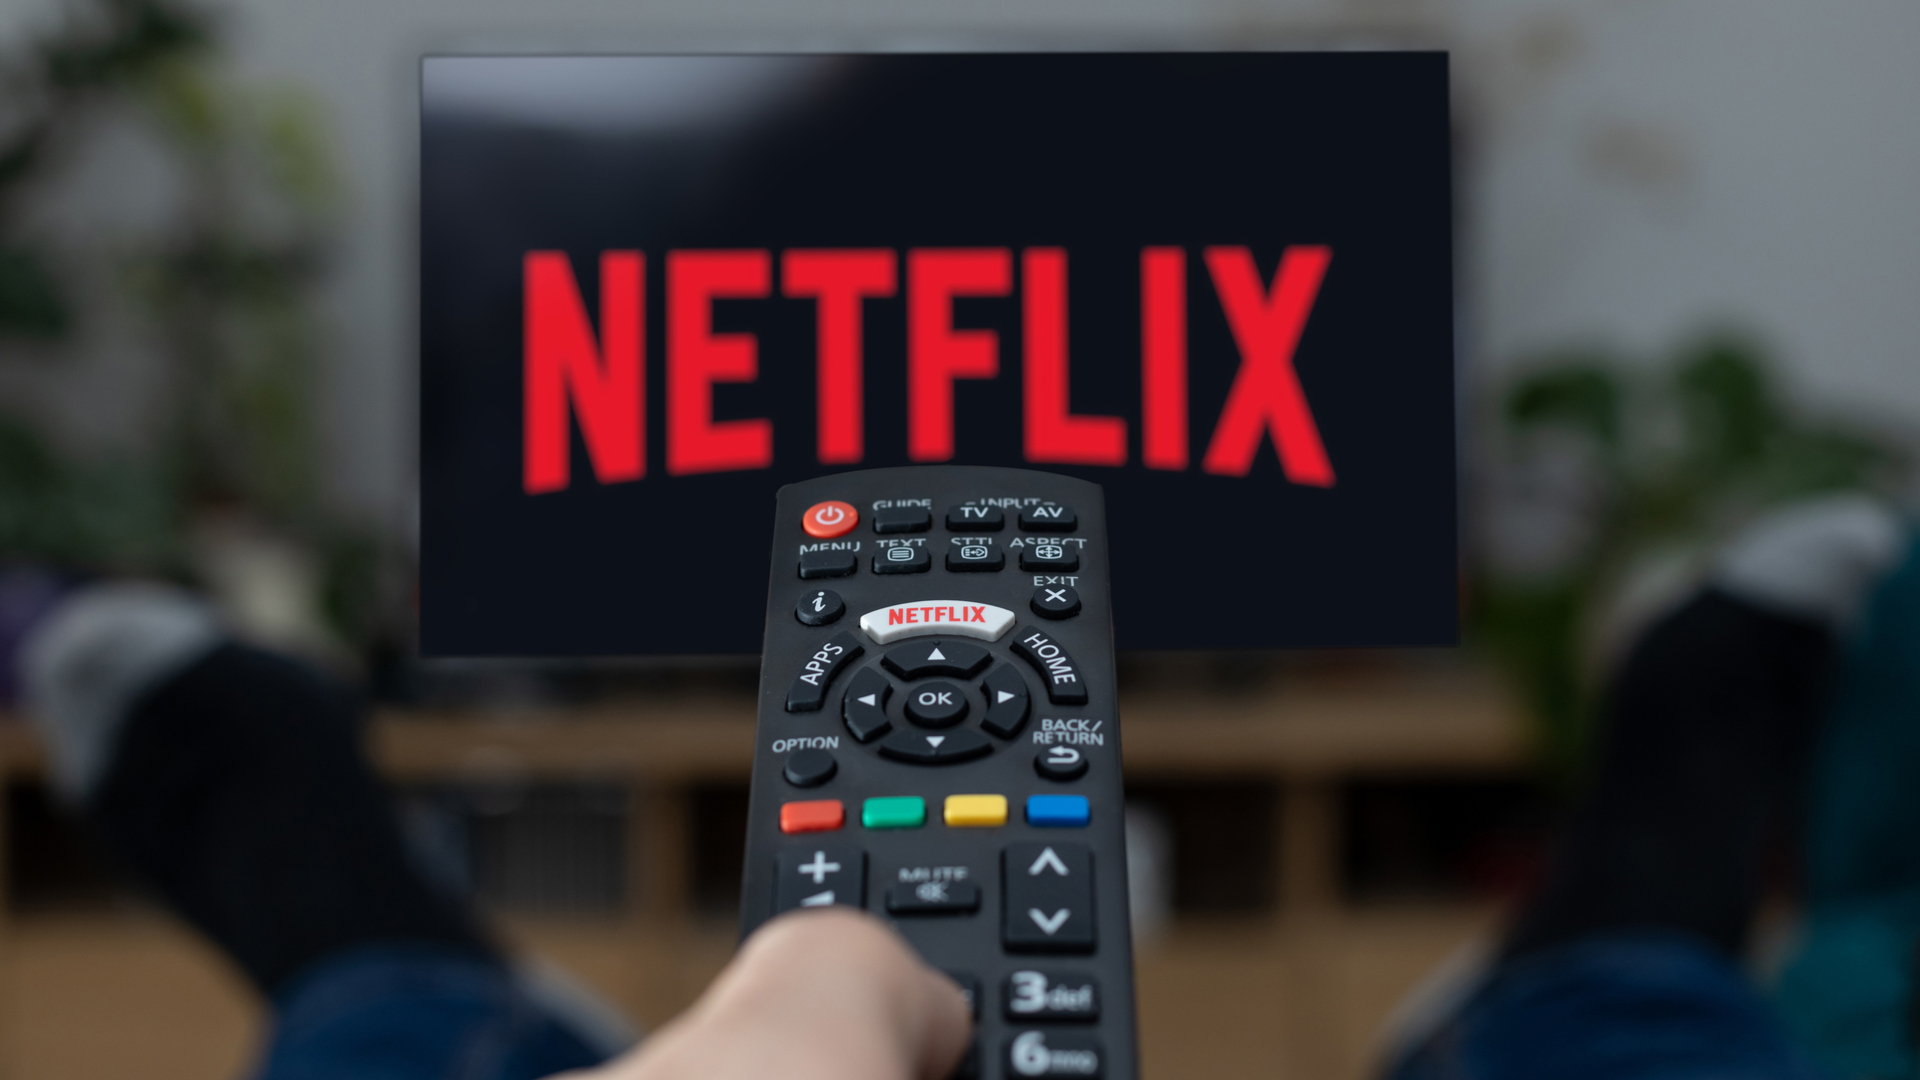 Ads on Netflix? What this means for advertisers